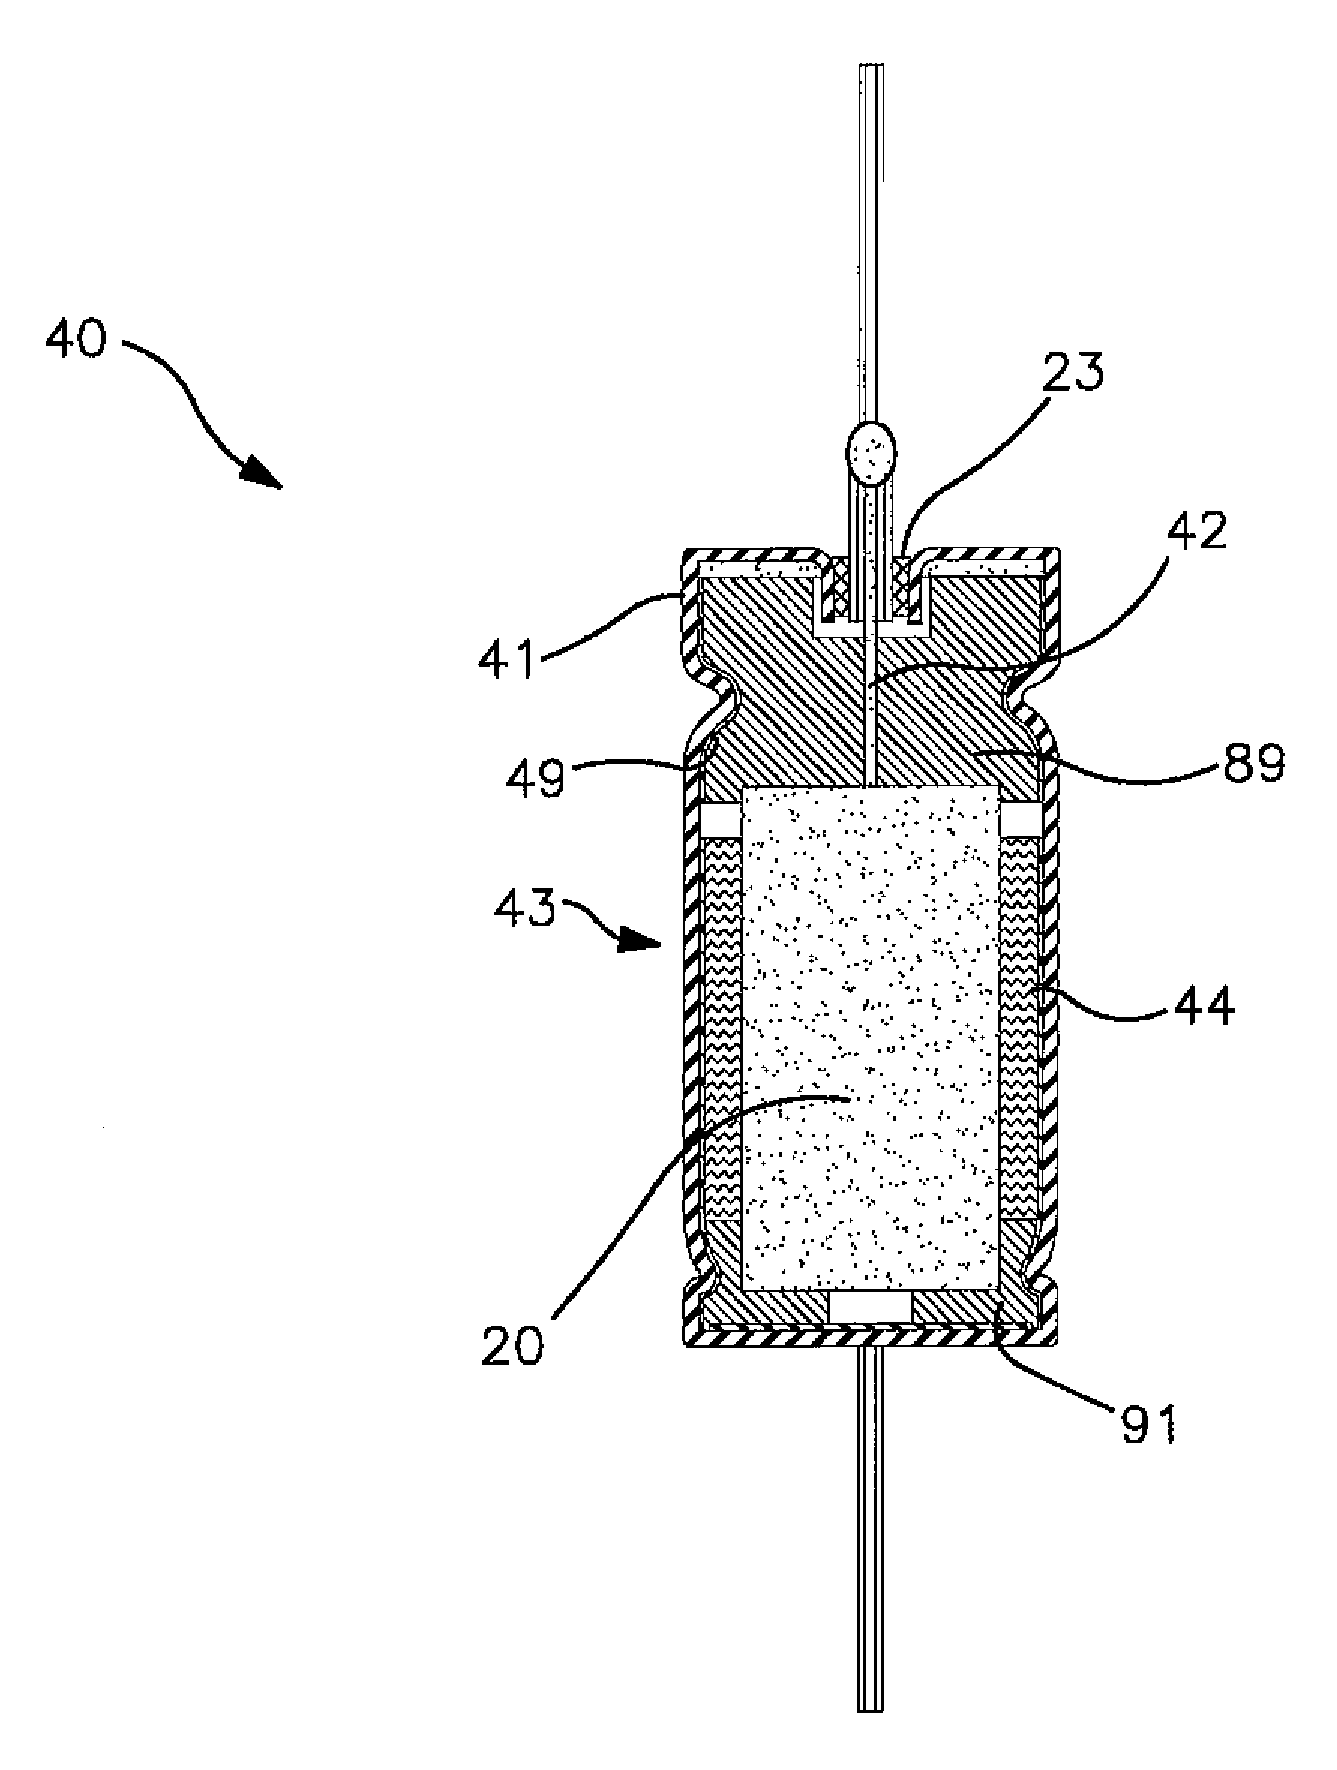 Conductive polymer coating for wet electrolytic capacitor